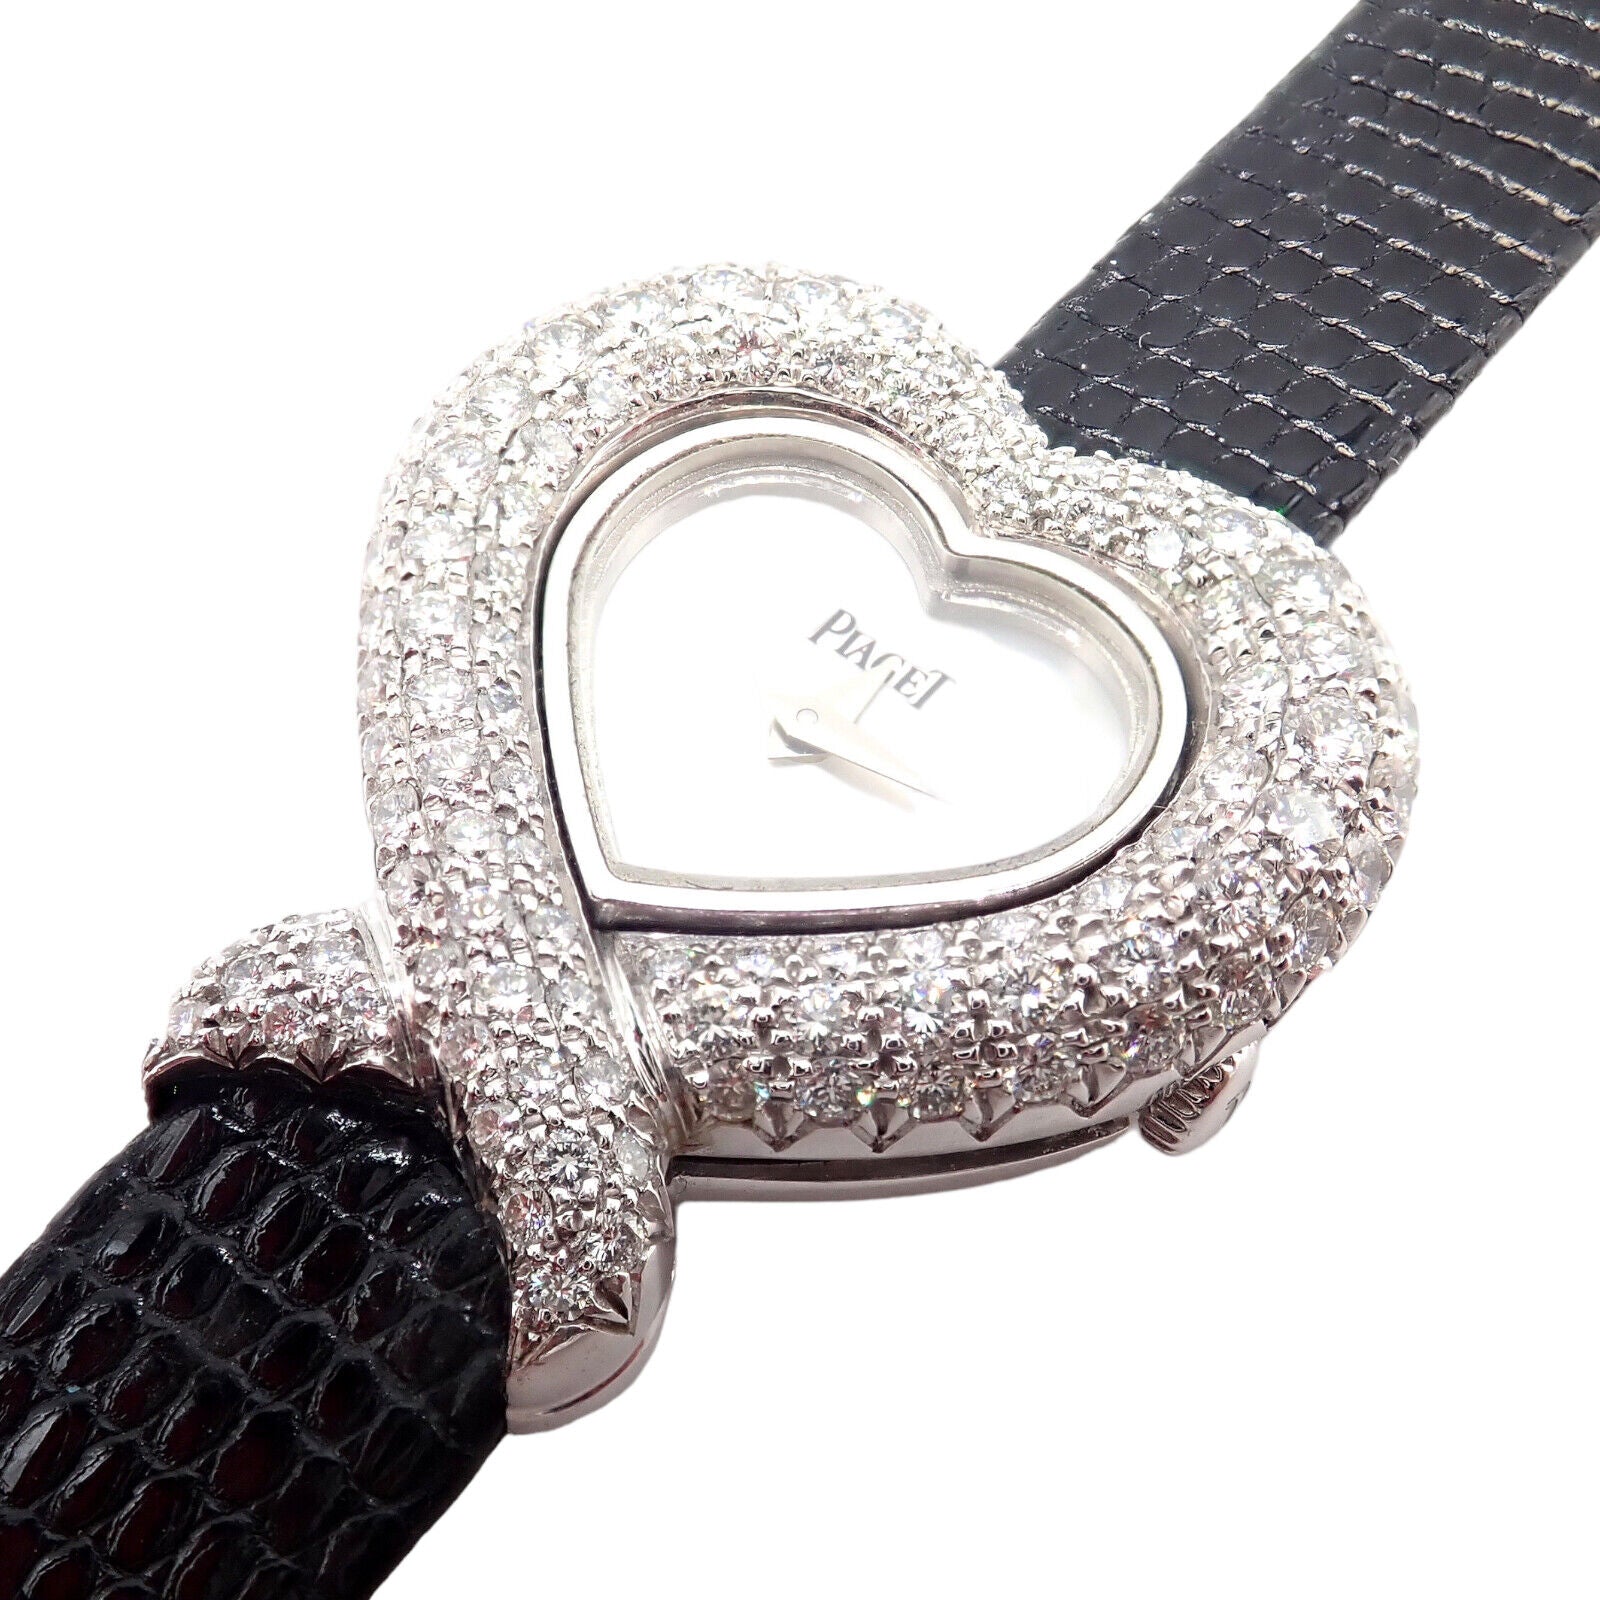 Piaget Jewelry & Watches:Watches, Parts & Accessories:Watches:Wristwatches Authentic! Piaget 18k White Gold Diamond Heart Ladies Watch 5285